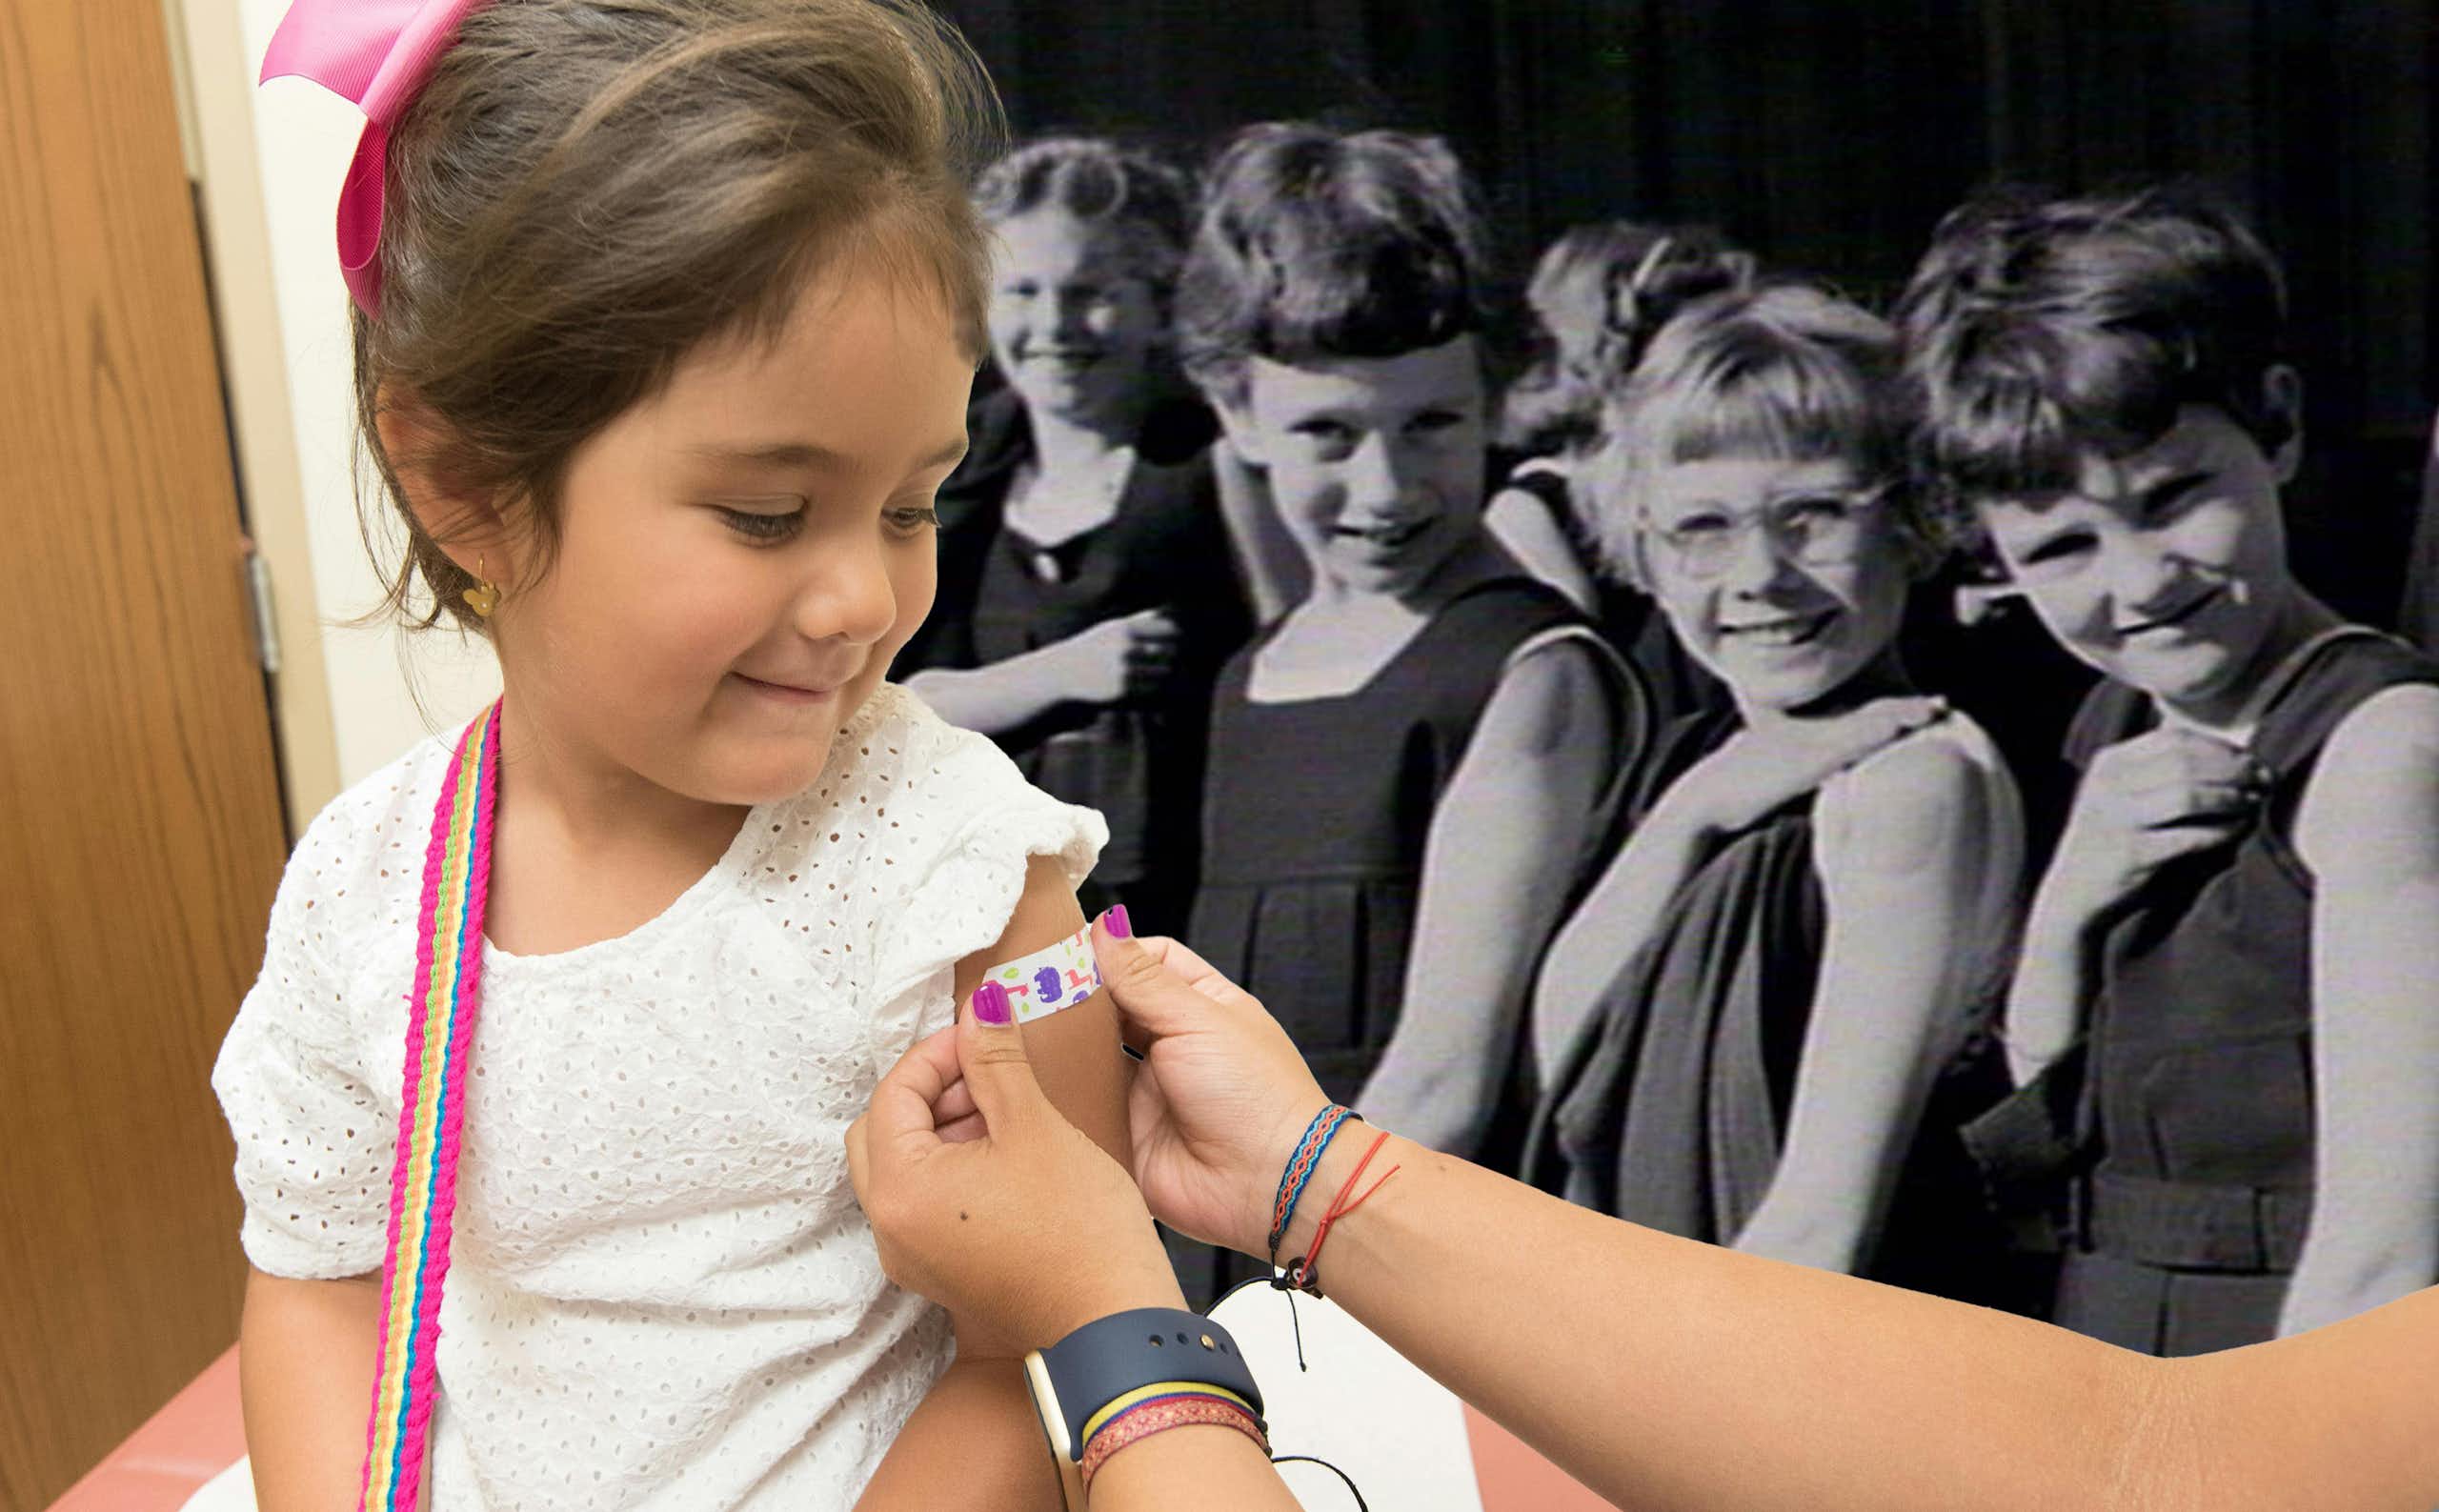 Girl getting vaccinated on left, with a group of girls showing their arms from the anti-polio vaccination at Randwick Girls School